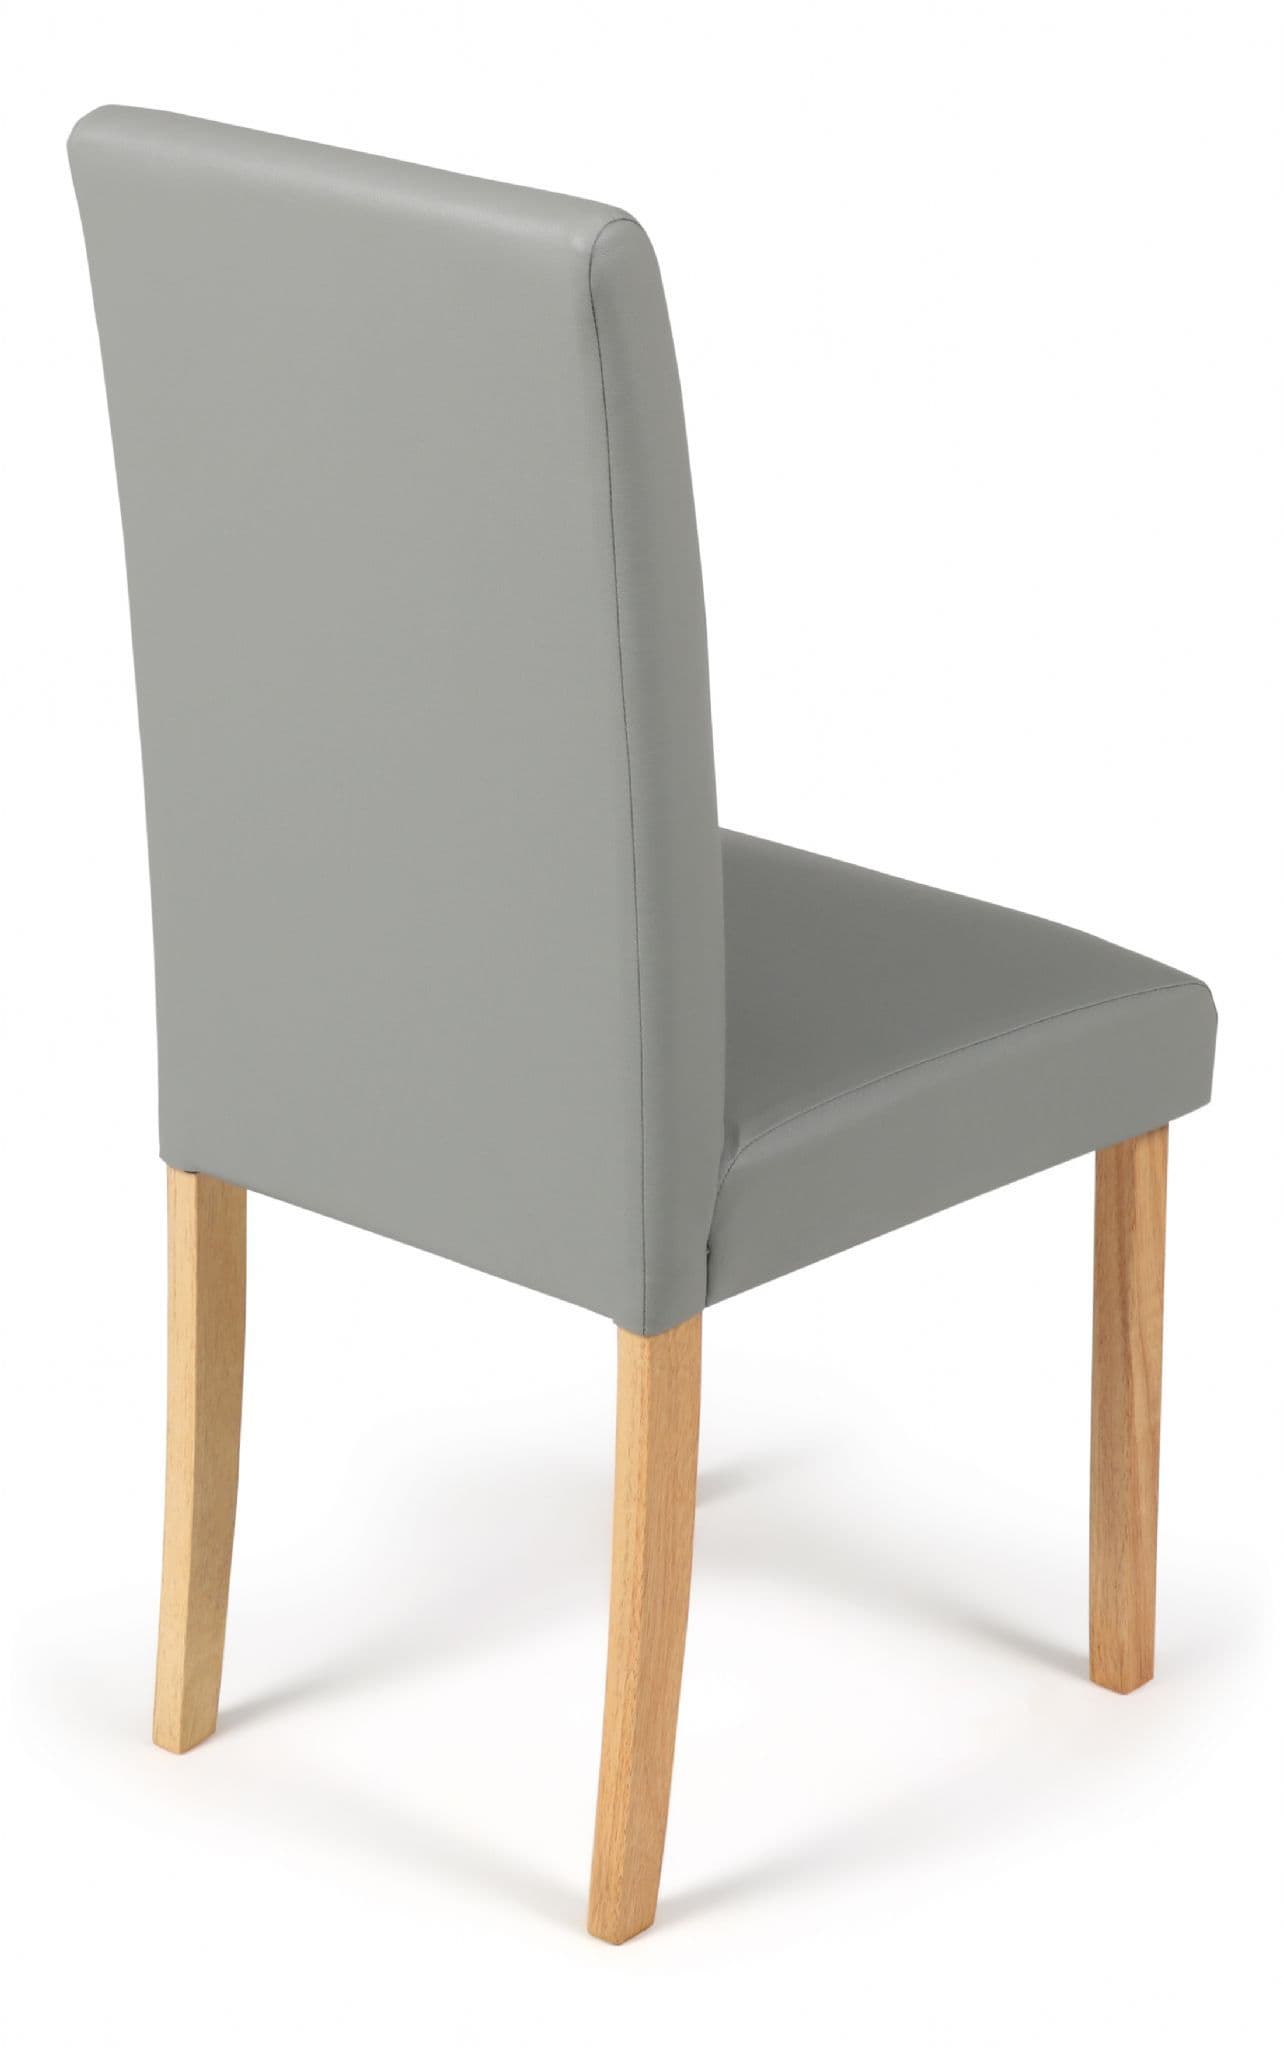 Matt Grey Torino Faux Leather Dining Chairs Rear View